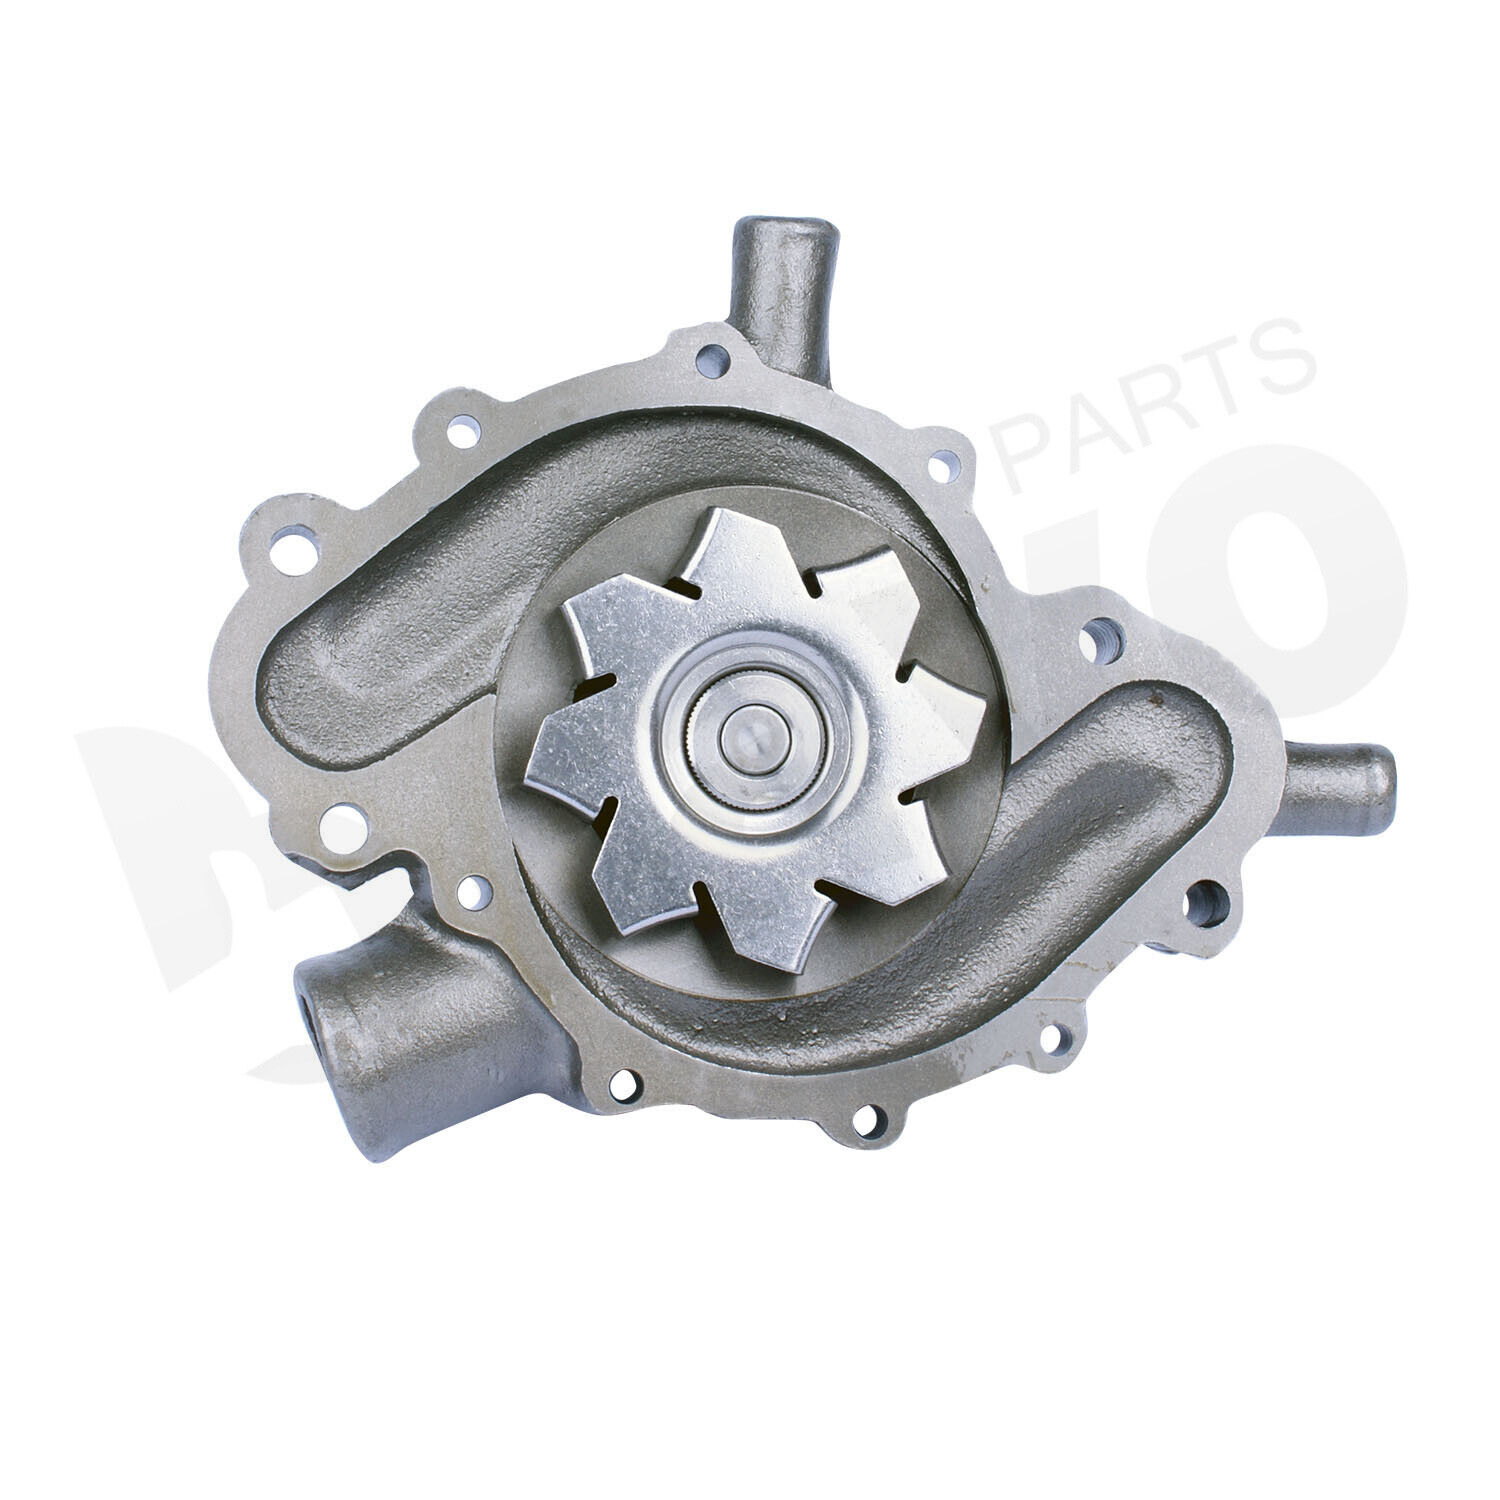 100% Fit Water Pump for JEEP CHEROKEE/JEEPSTER,AMERICAN MOTORS AMBASSADOR PACER